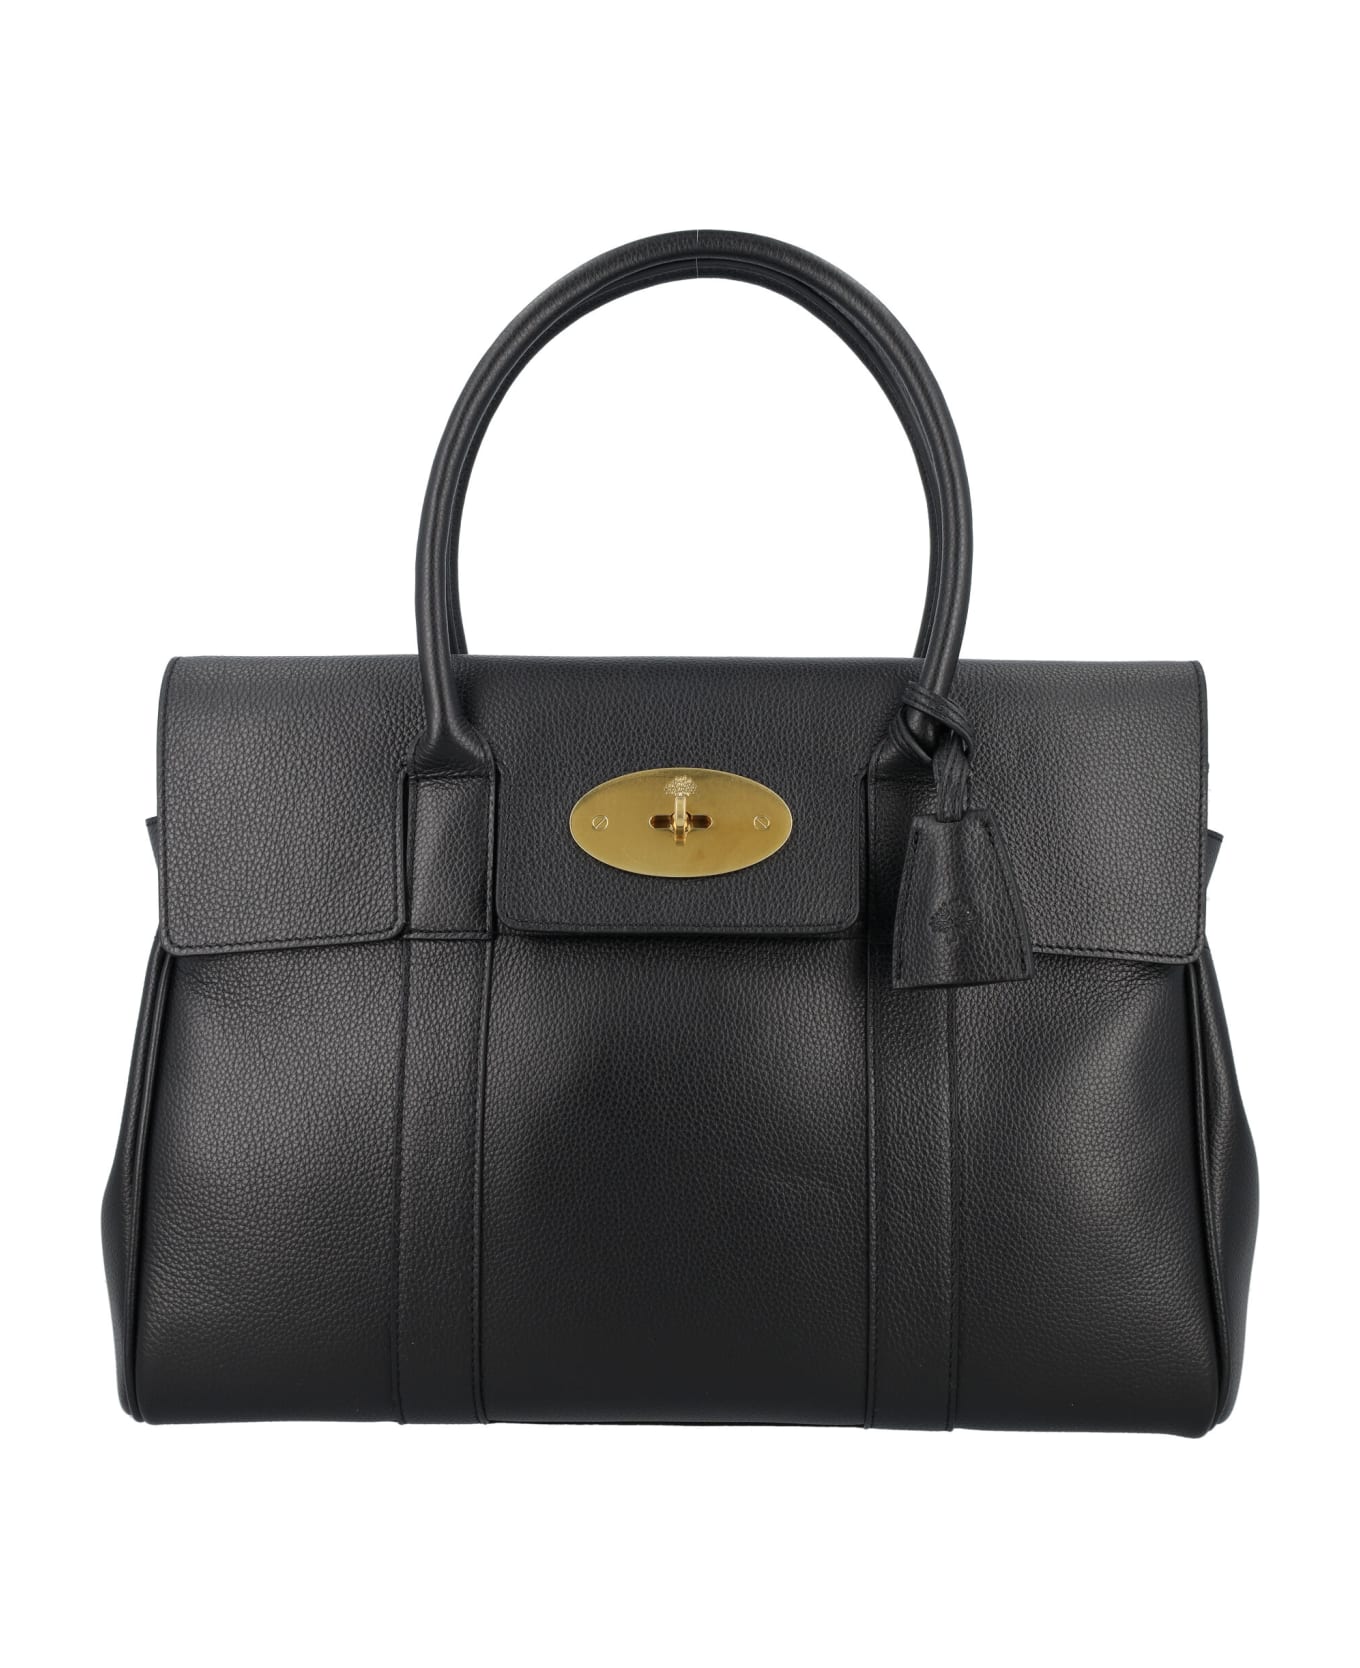 Mulberry Bayswater - BLACK トートバッグ